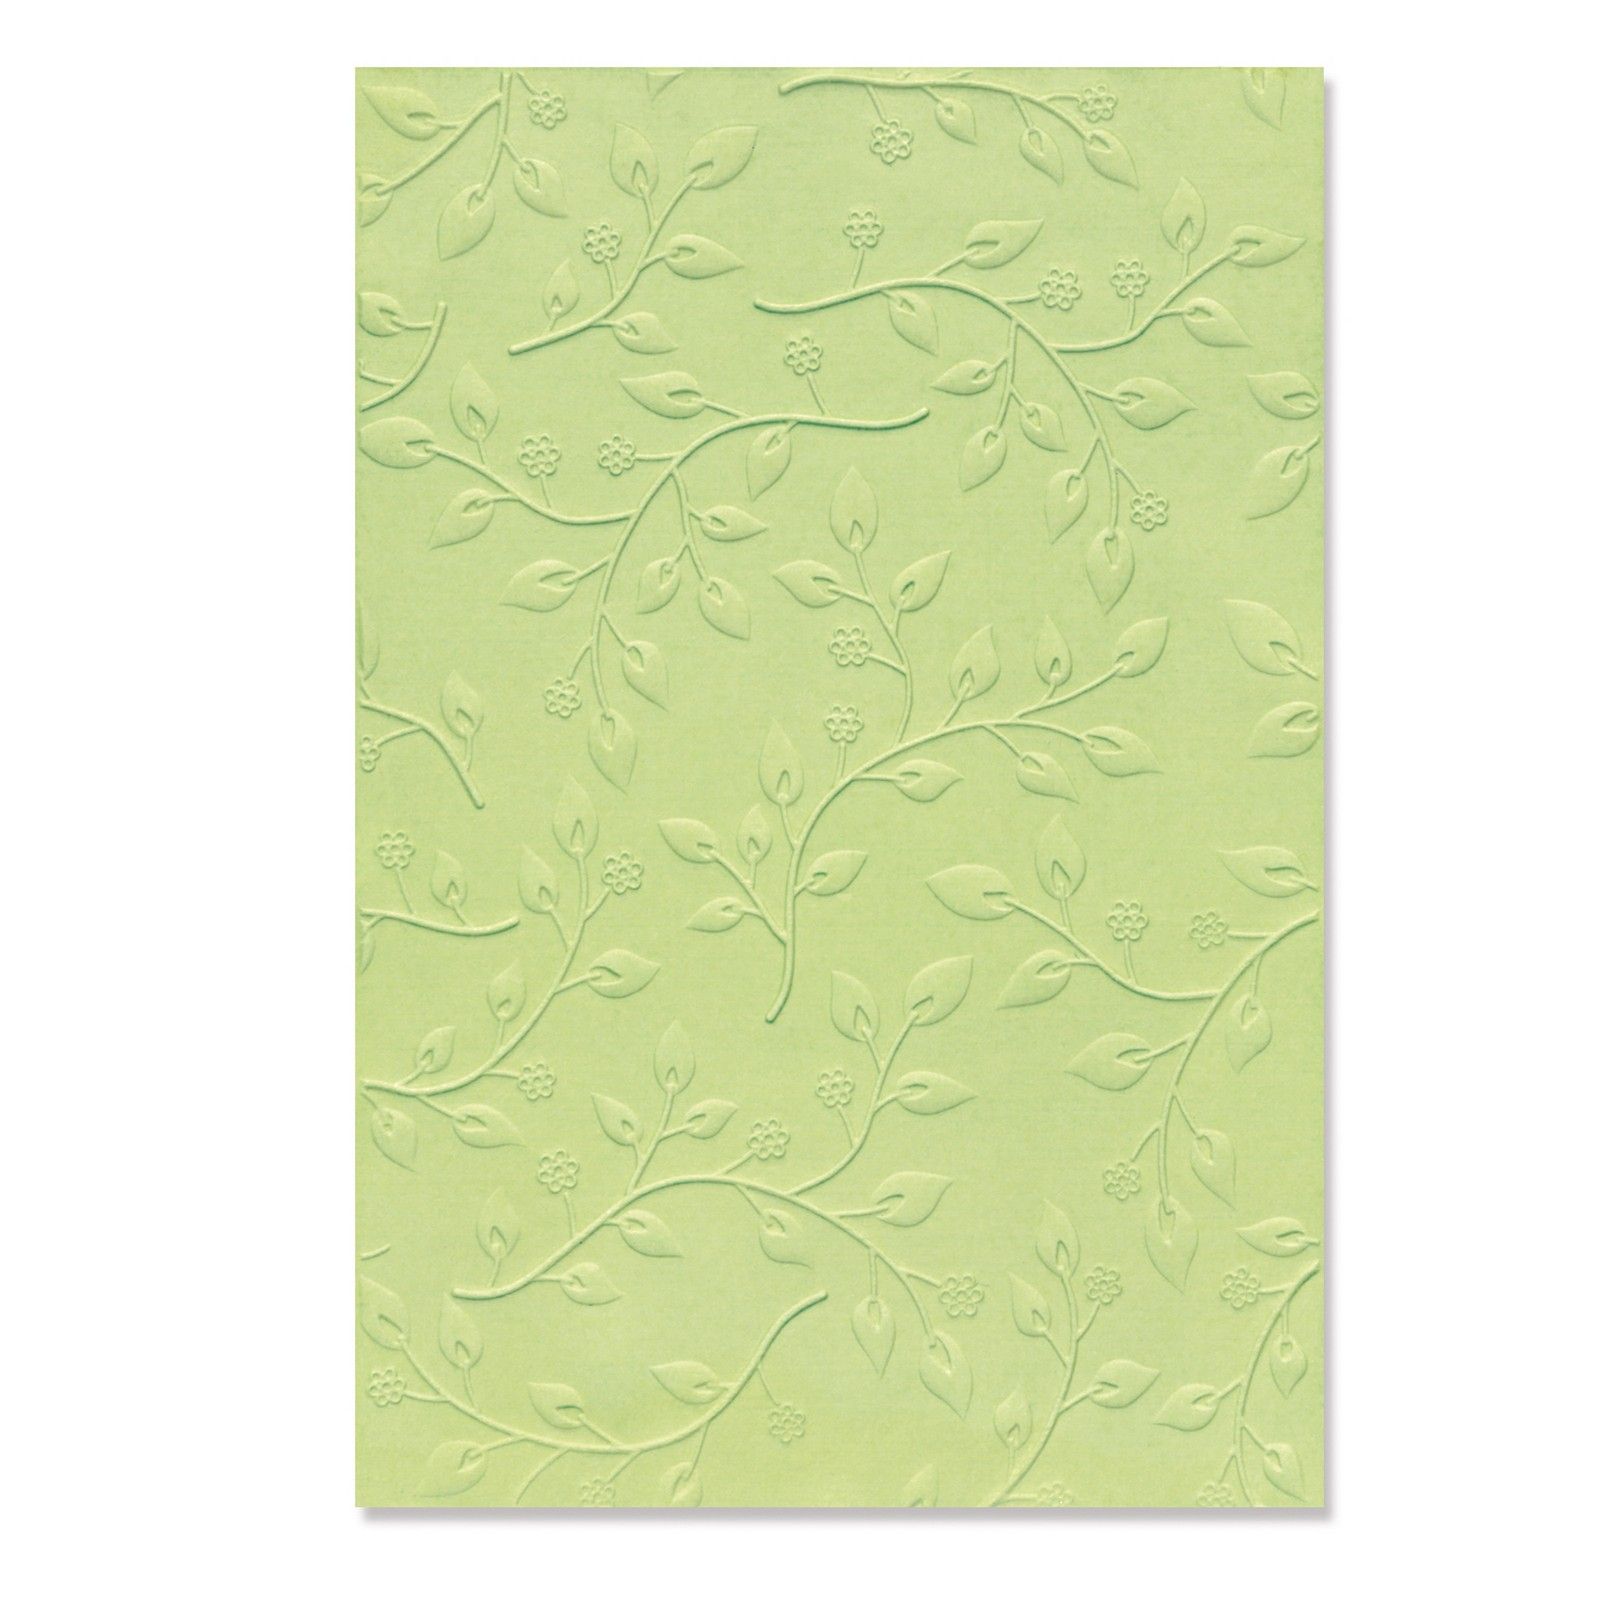 Sizzix • 3-D Textured Impressions Embossing Folder Summer Foliage by Sizzix